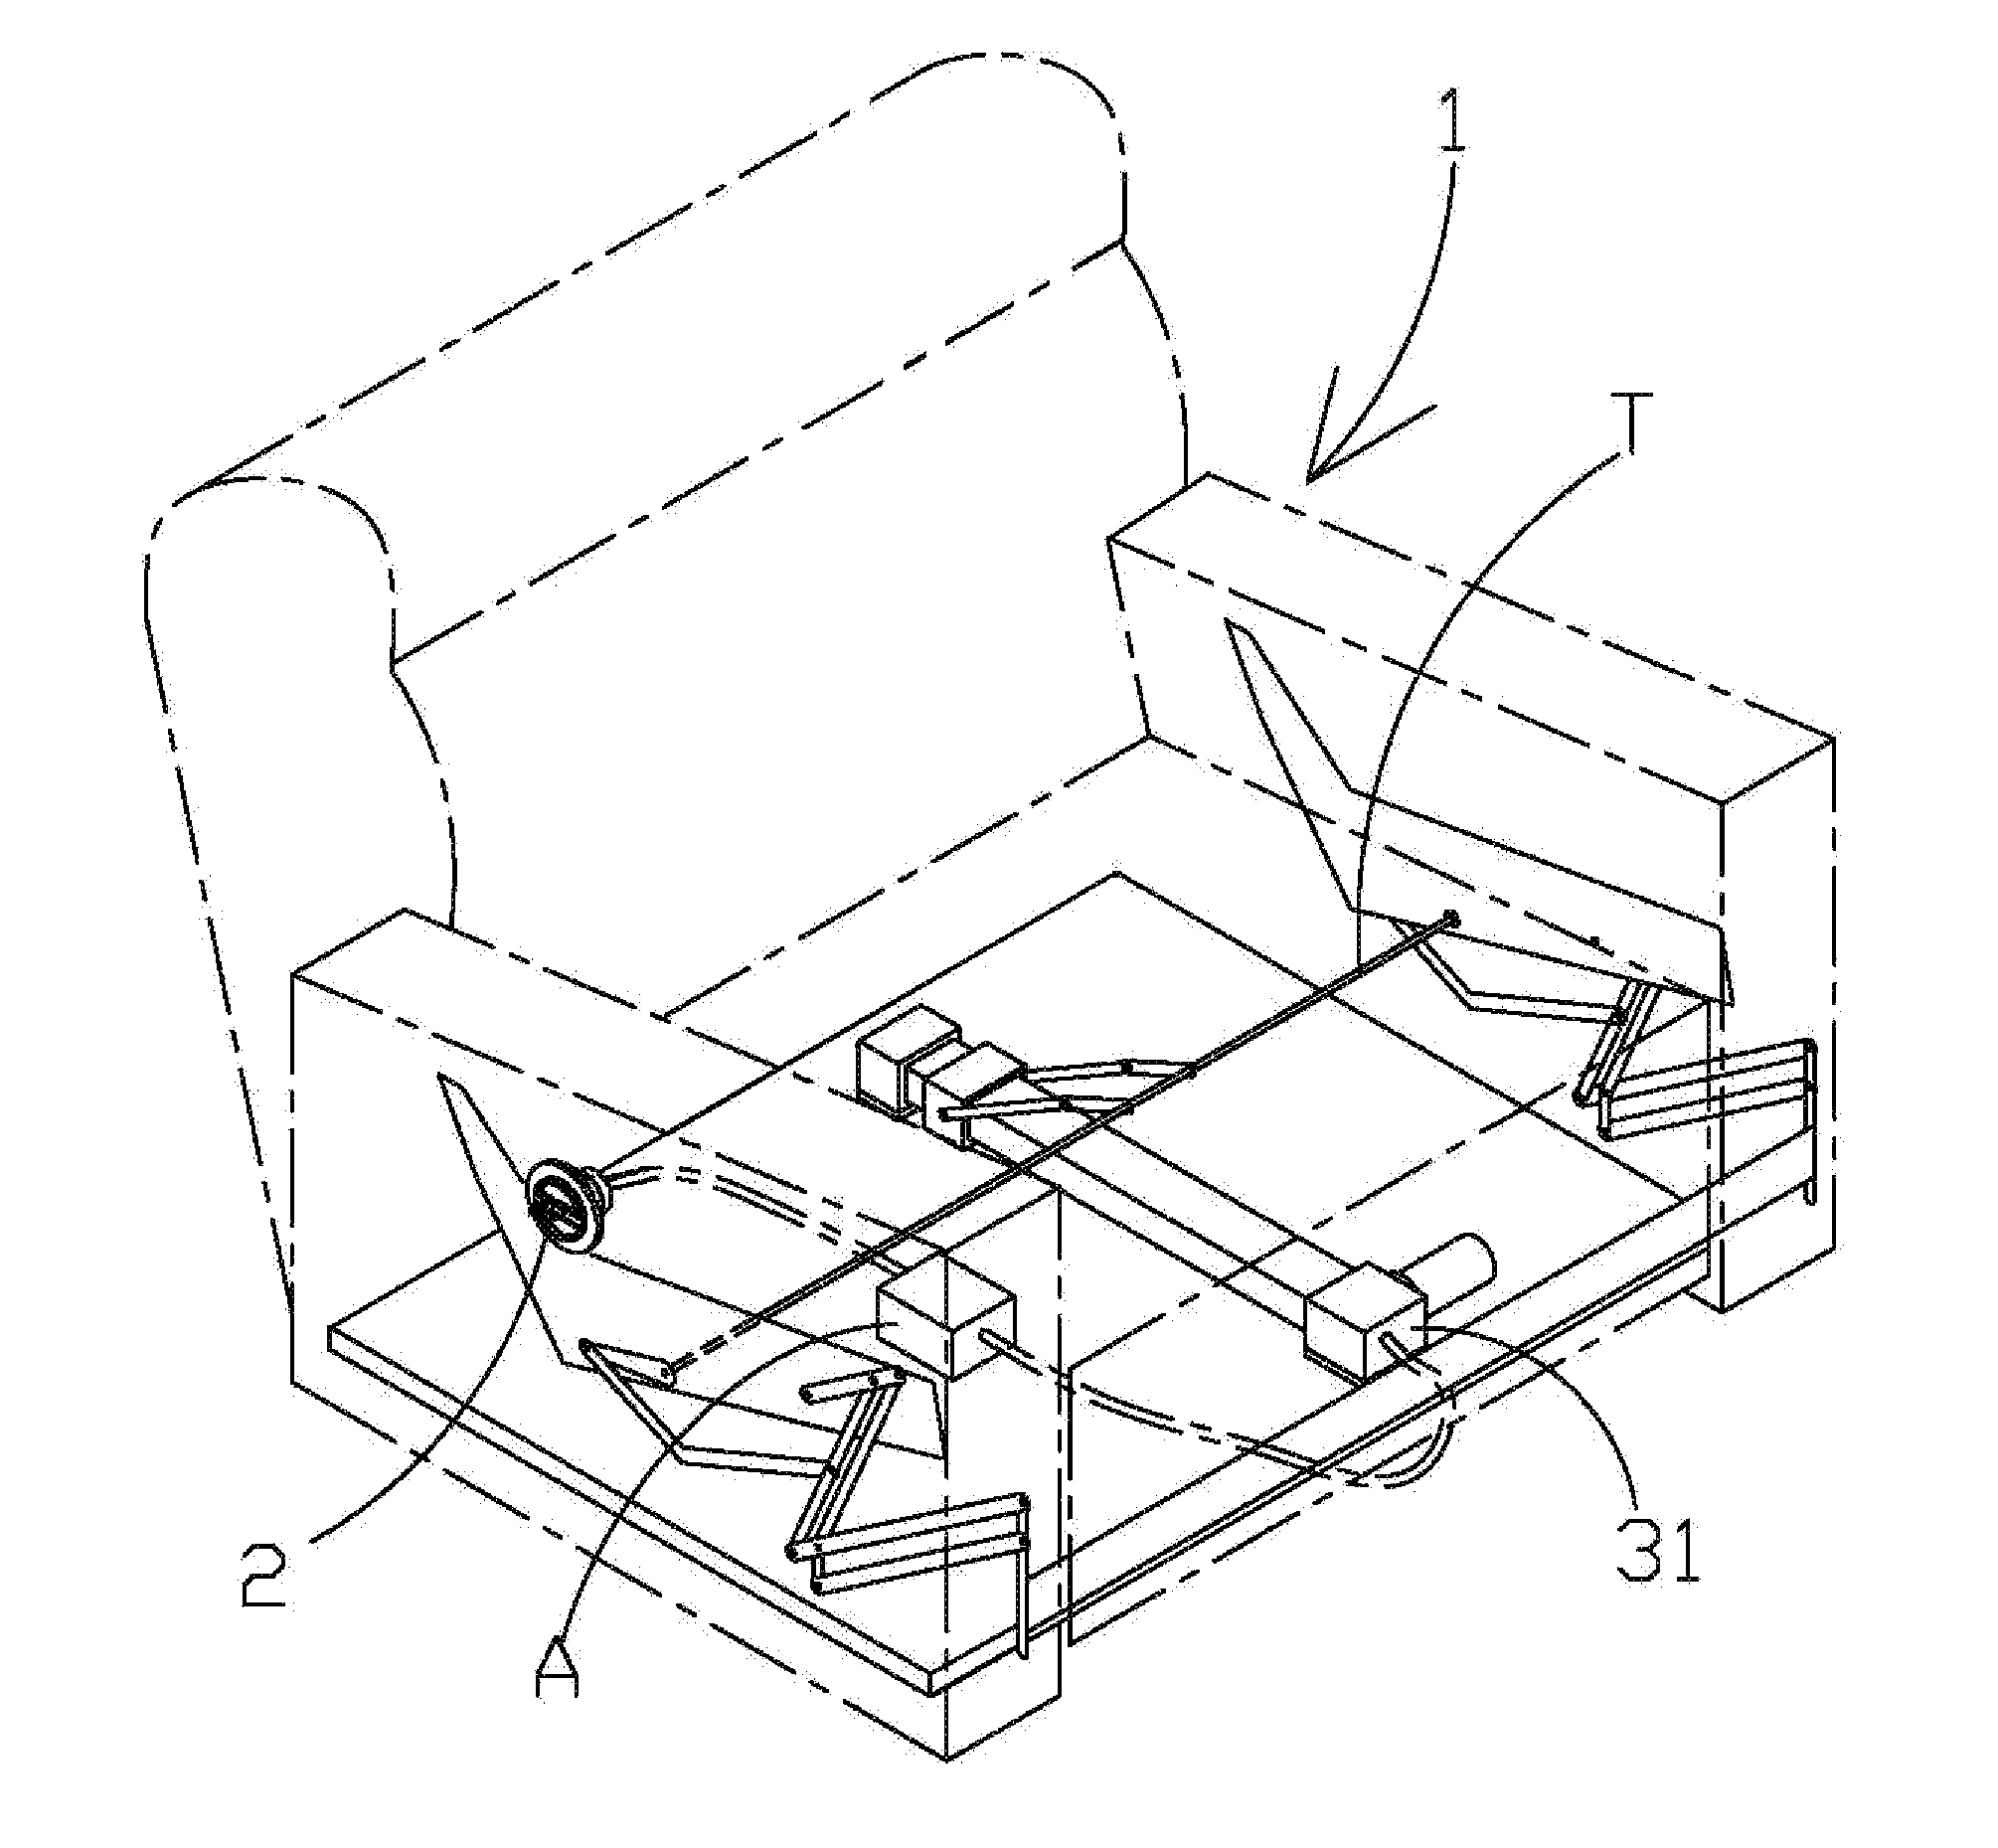 Chair with electrically adjustable components